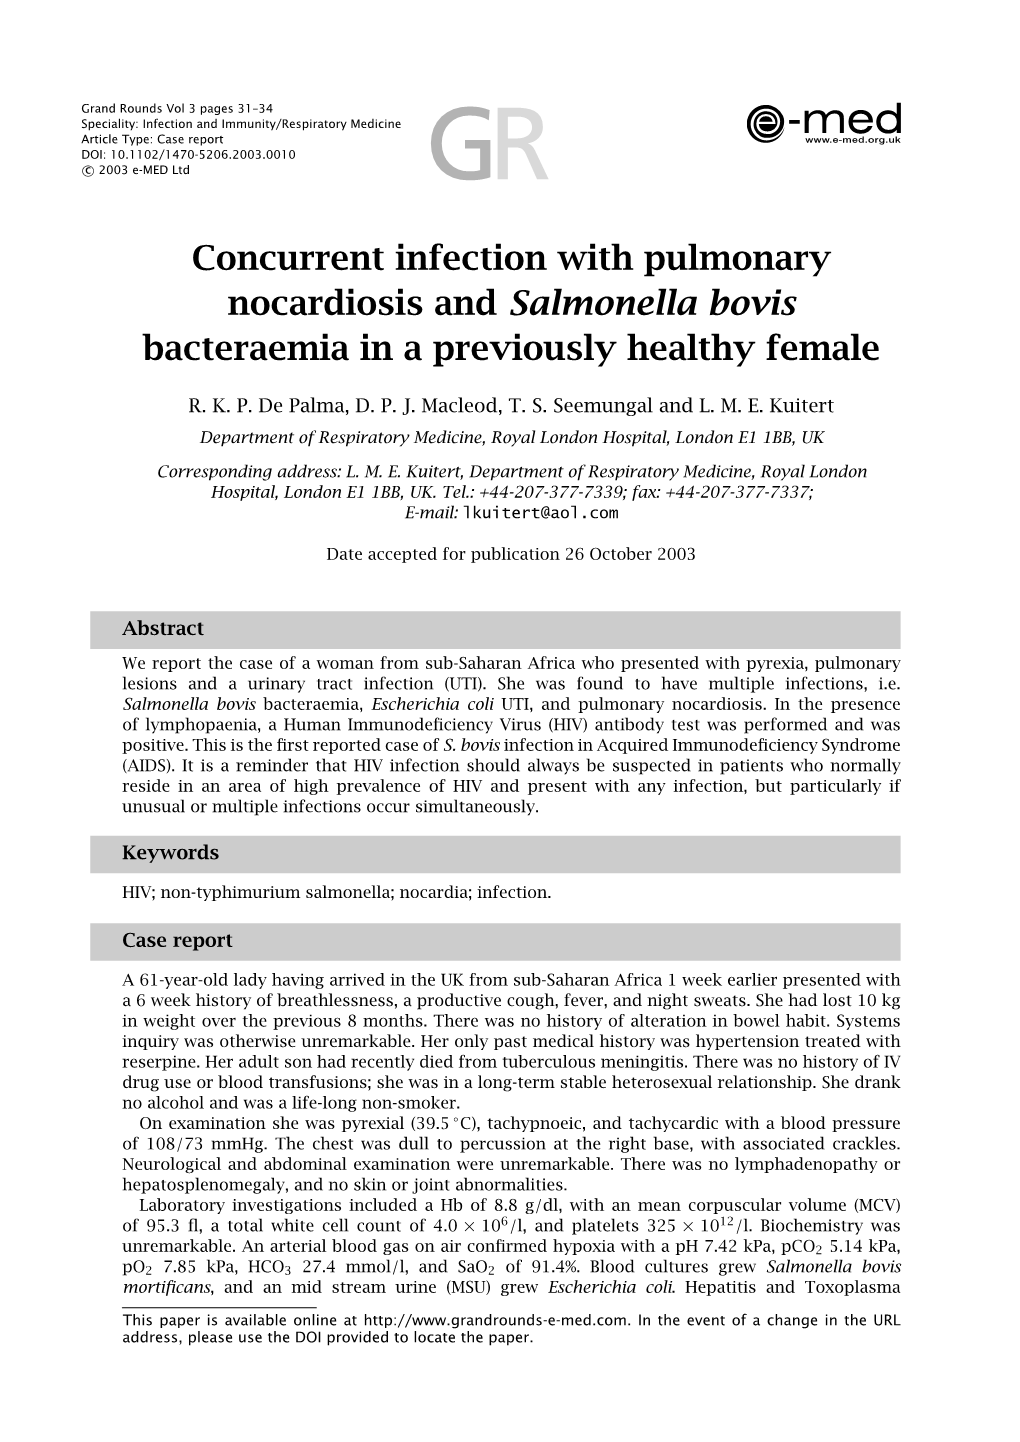 Concurrent Infection with Pulmonary Nocardiosis and Salmonella Bovis Bacteraemia in a Previously Healthy Female